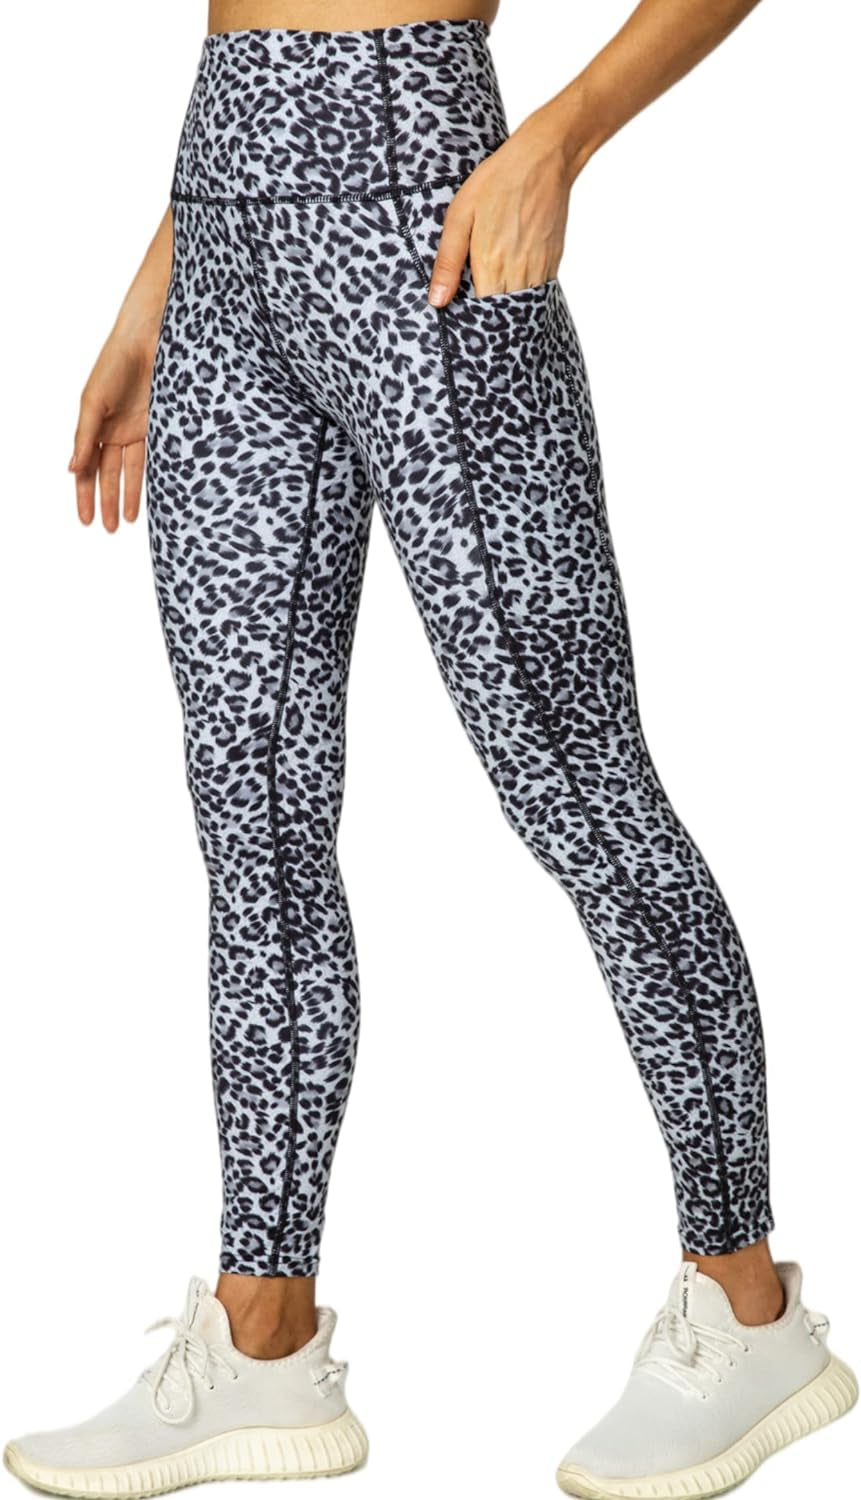 Women's Workout Leggings with Pockets